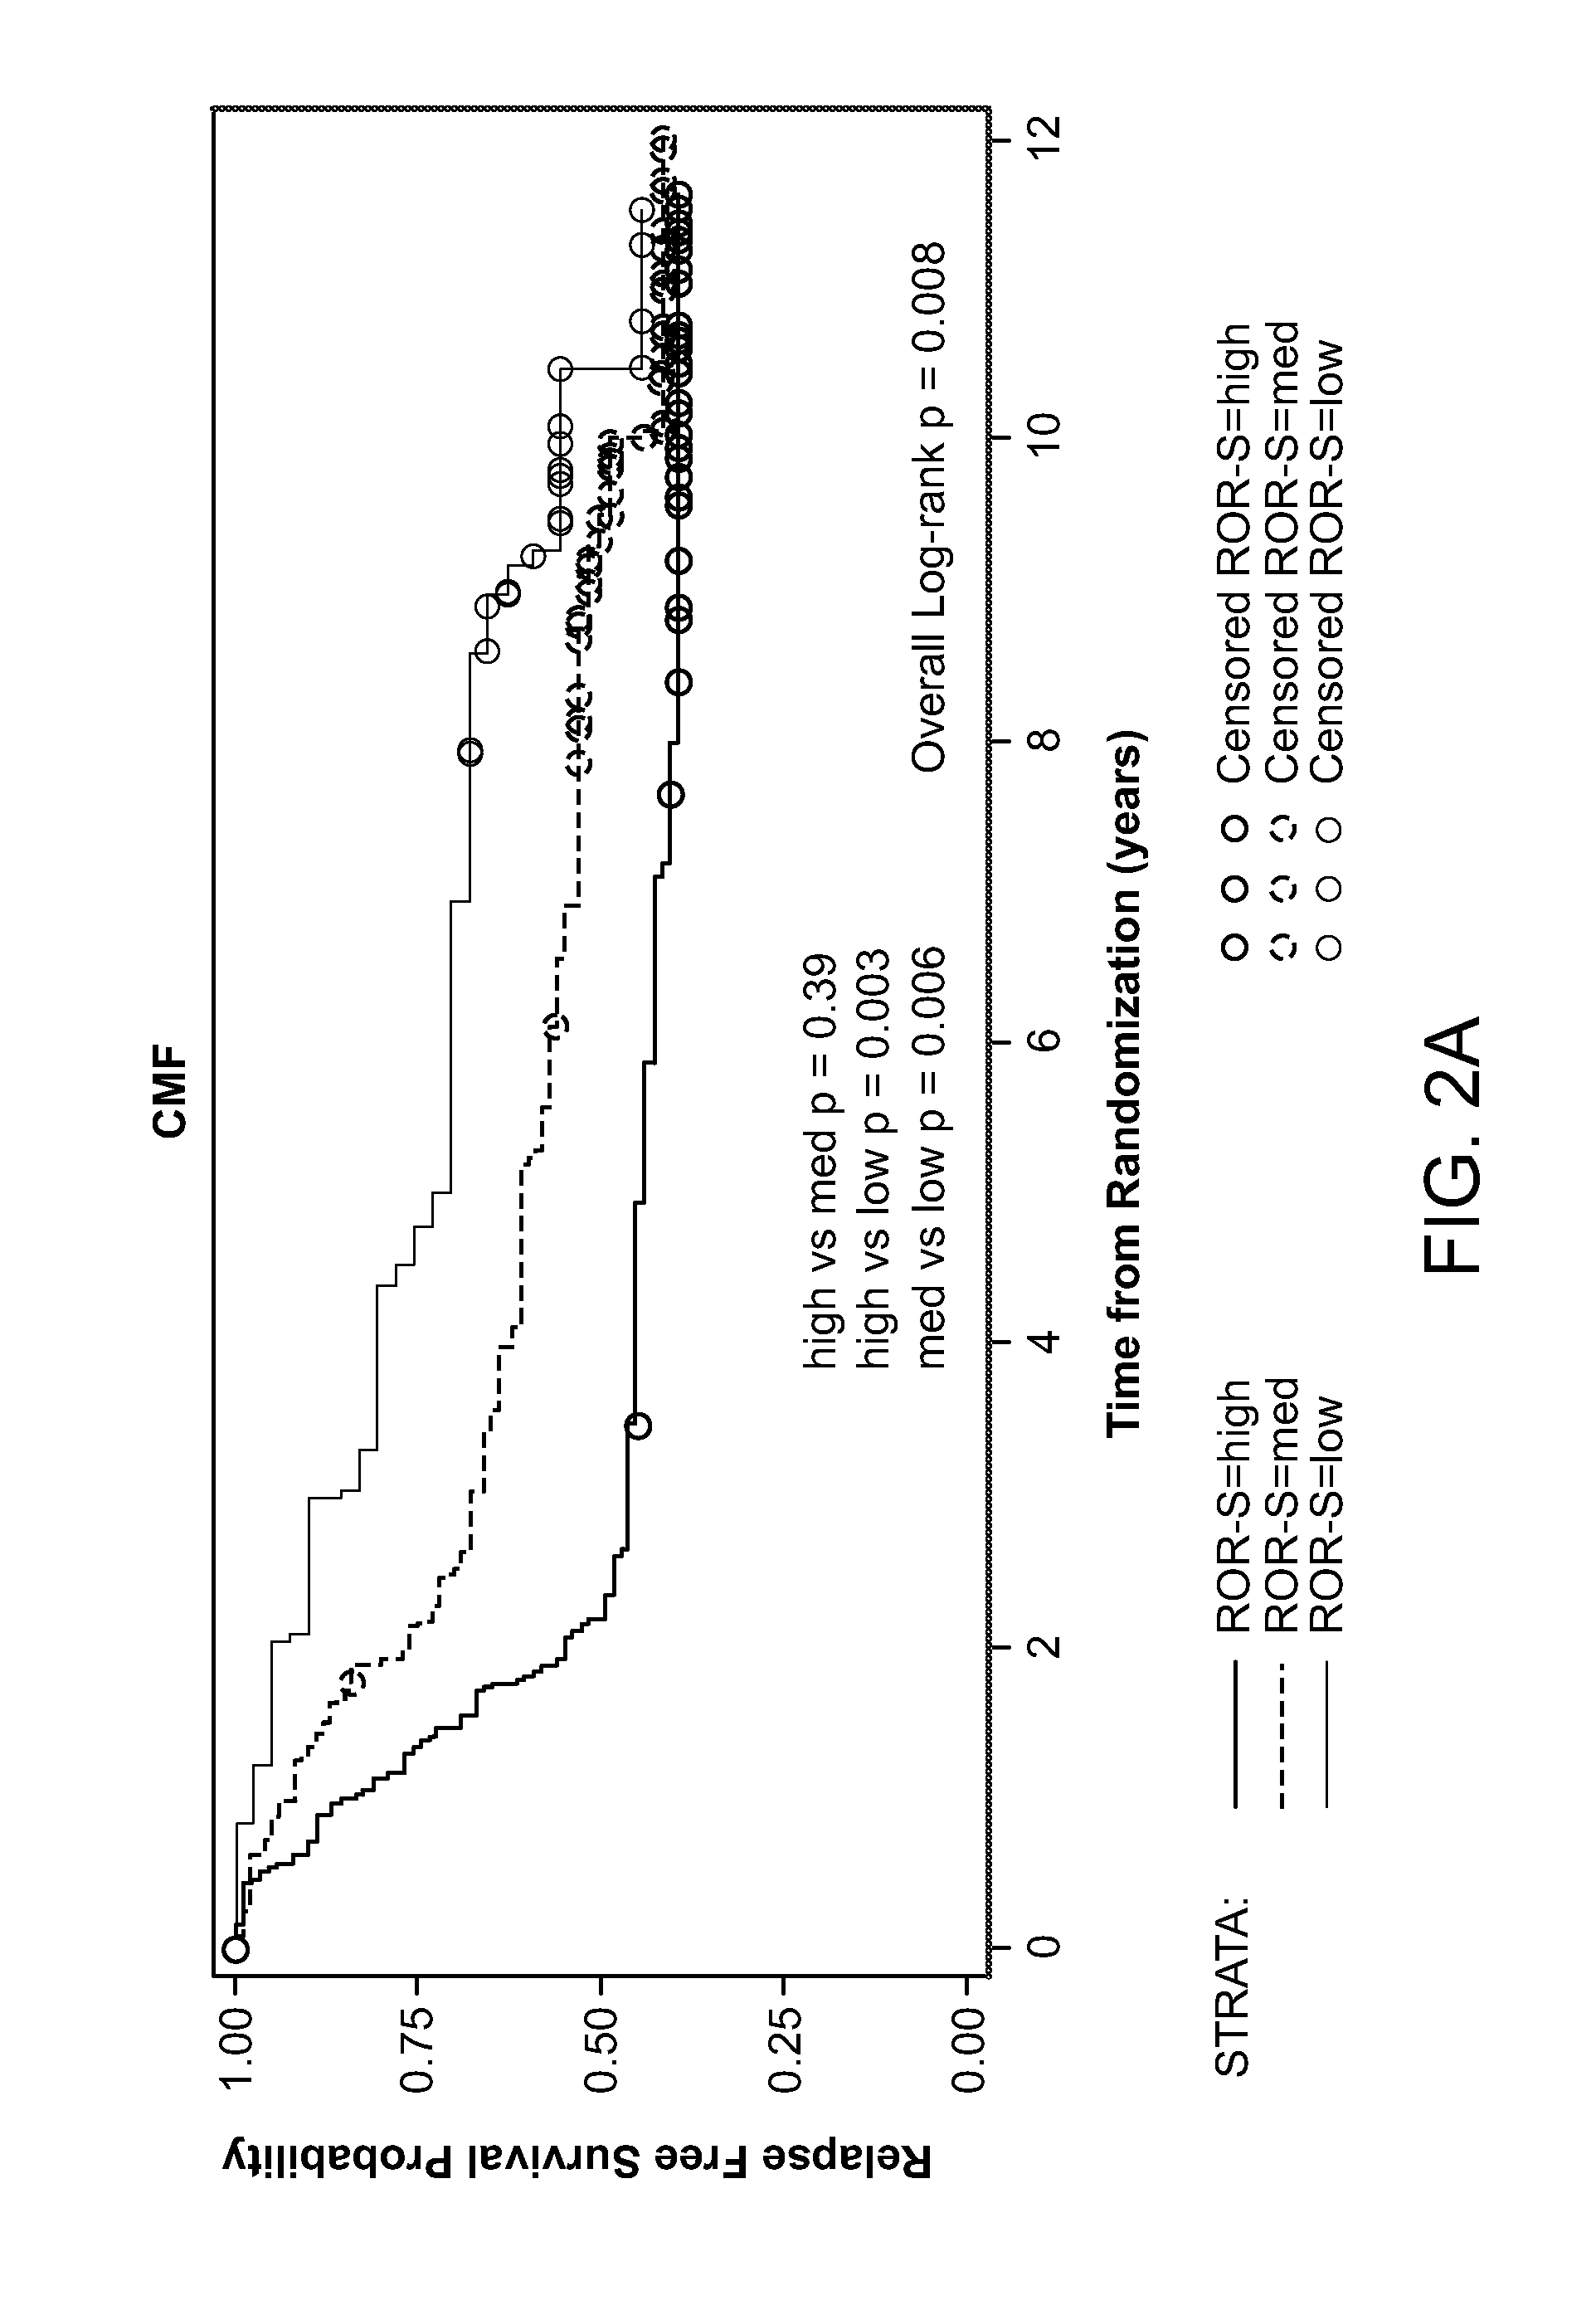 Methods of Treating Breast Cancer with Anthracycline Therapy